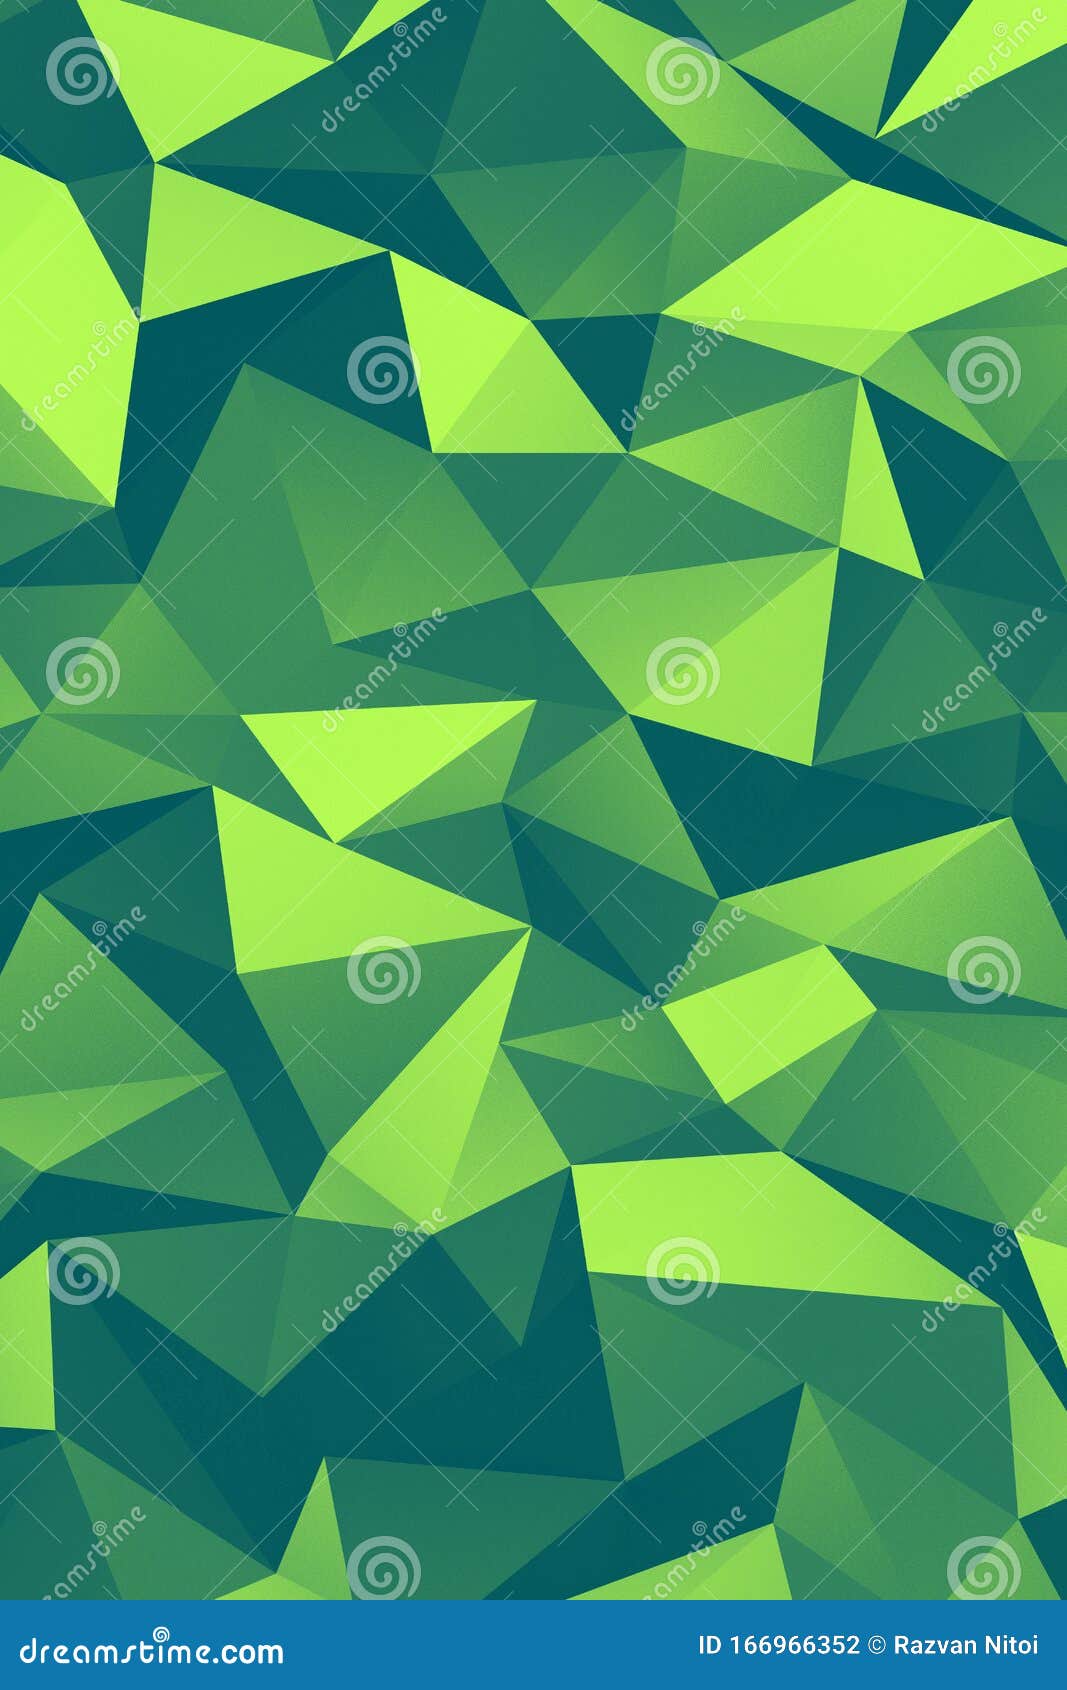 Asian Paints EzyCR8 Geometric Pyramids  Green DIY Self Adhesive Wallpaper  for Bedroom Living Room WaterResistant MultiSurface Application 3D  Stickers for Walls 45 x 300cm  Amazonin Home Improvement